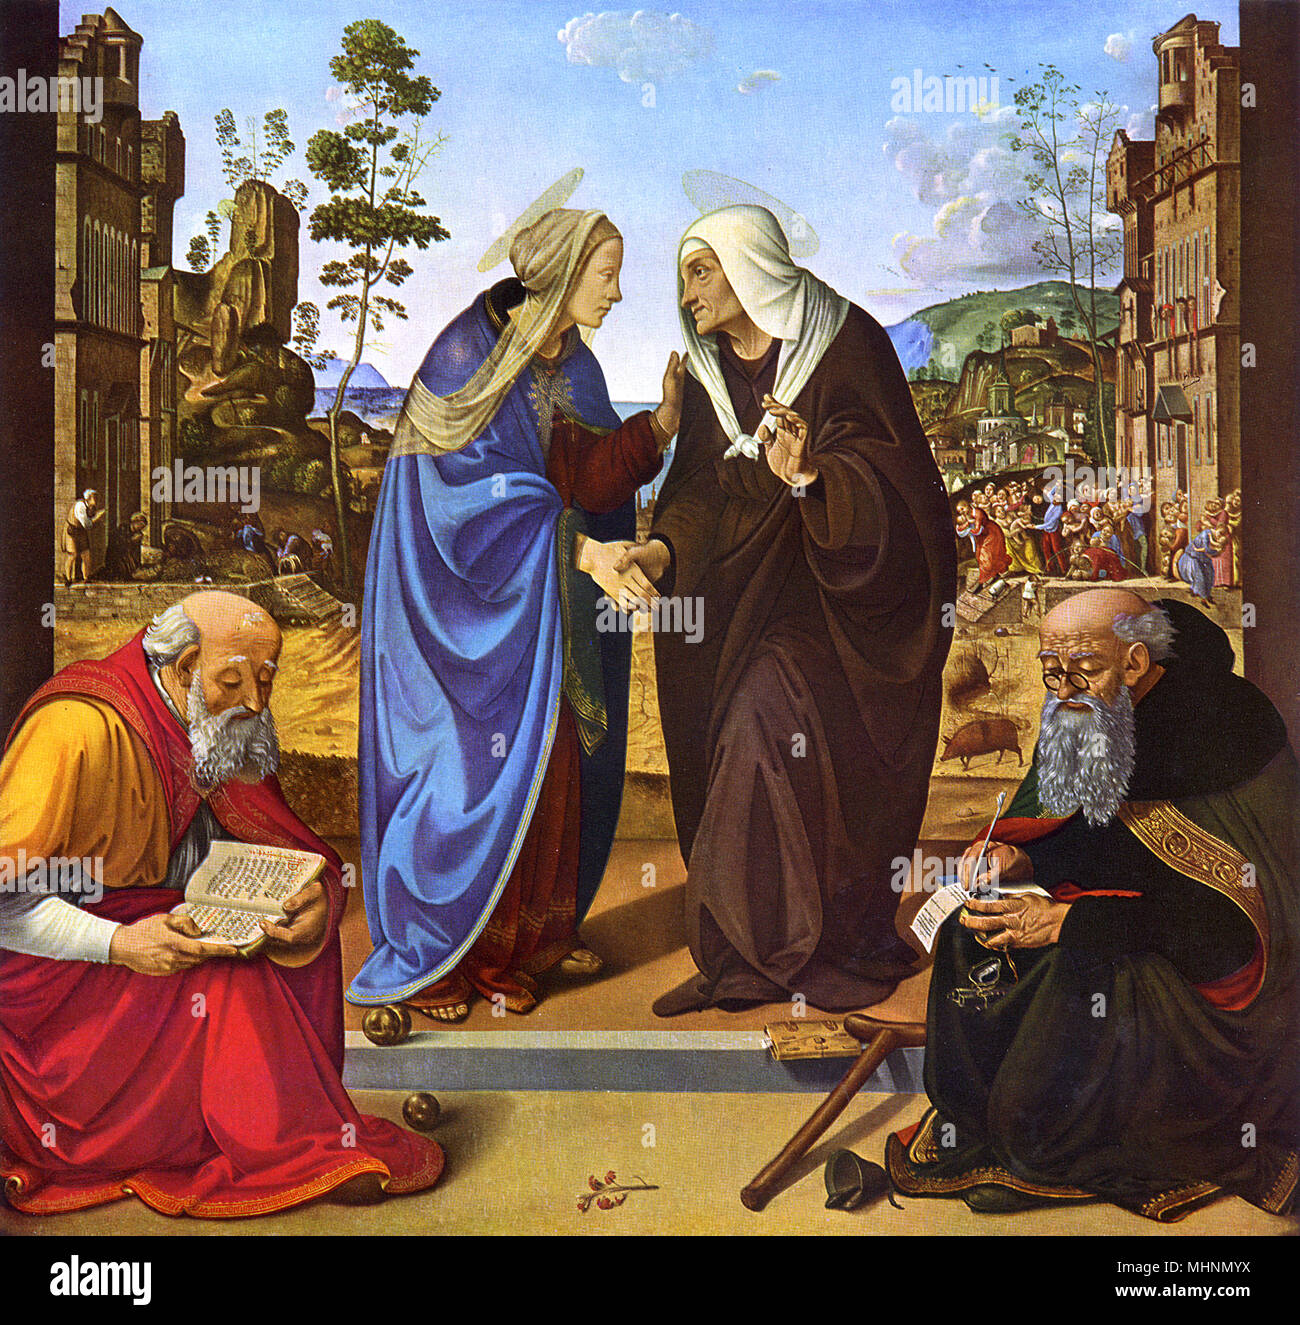 The Visitation with two Saints by Piero di Cosimo (1462-c.1521) - painting on wood for the Chapel of Gino Capponi in Santo Spirito, Florence     Date: late 15th century Stock Photo